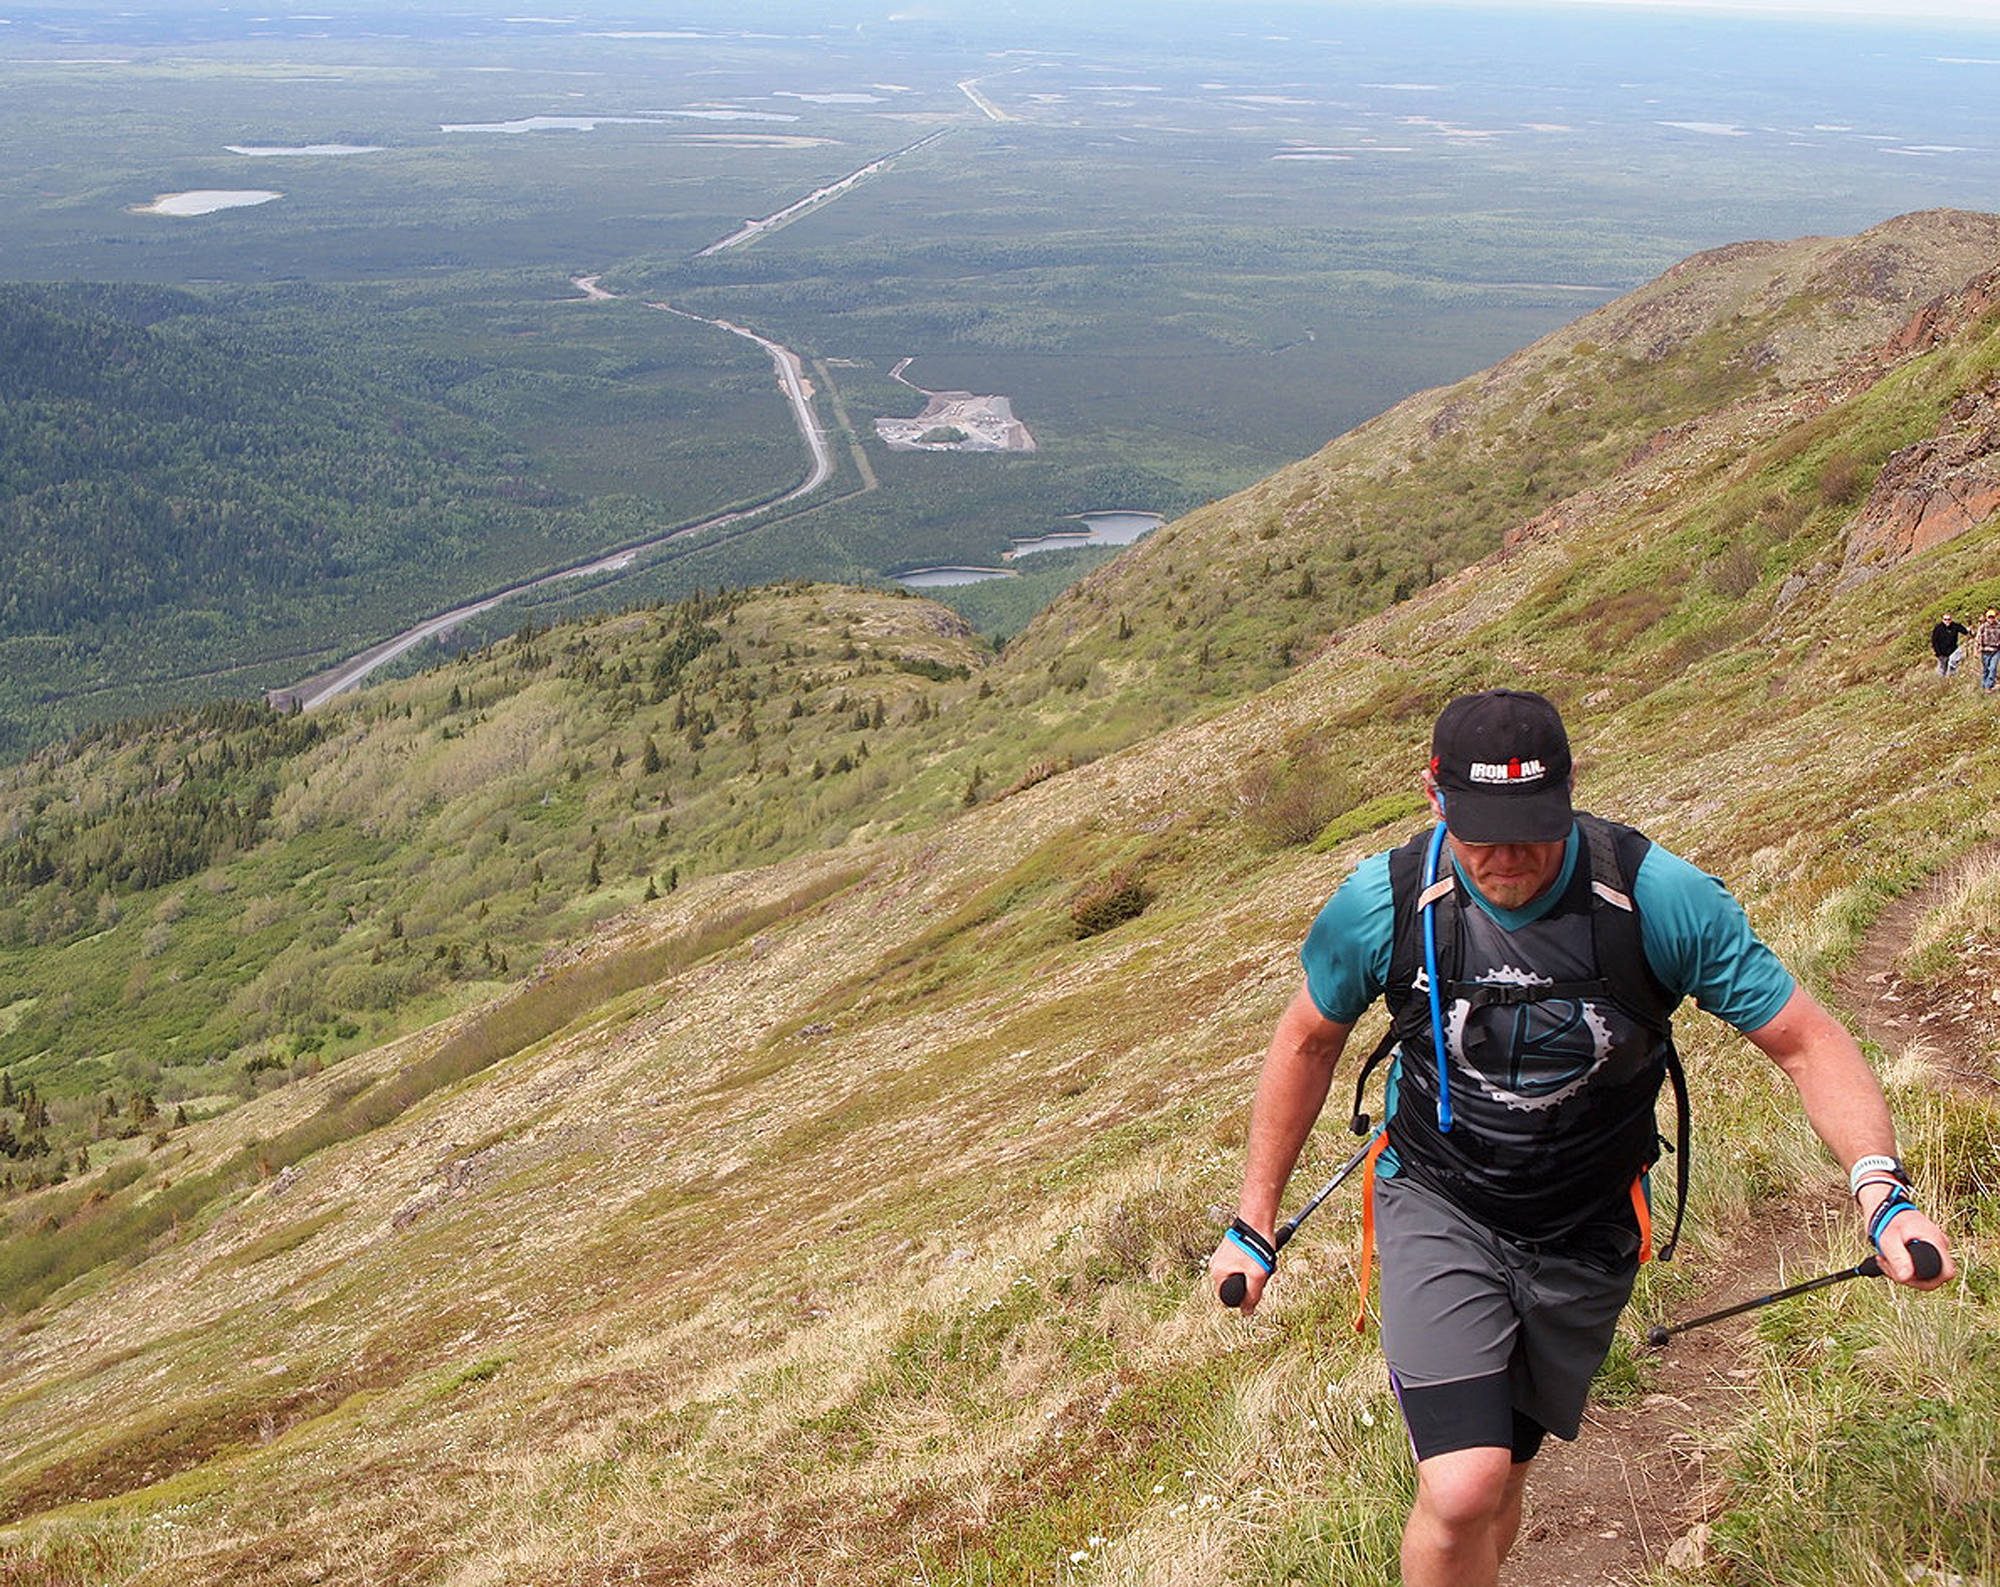 Kenai resident Eric Thomason hikes up the Skyline trail in May 2018 while training for the Alaskaman Extreme Triathlon. (Photo provided by Jeff McDonald)